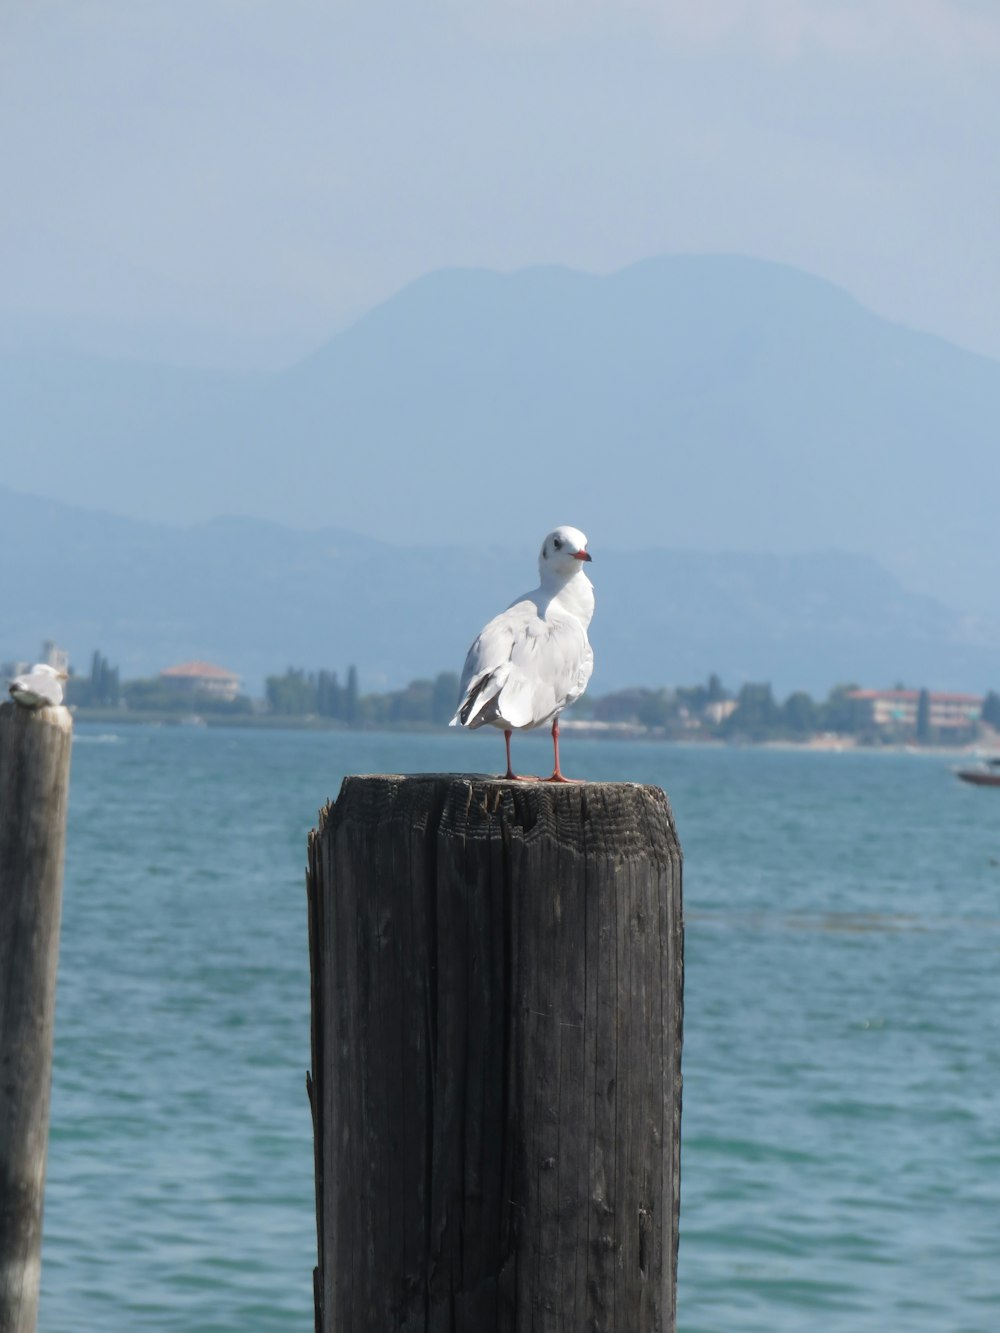 a seagull on a wooden post in front of a body of water